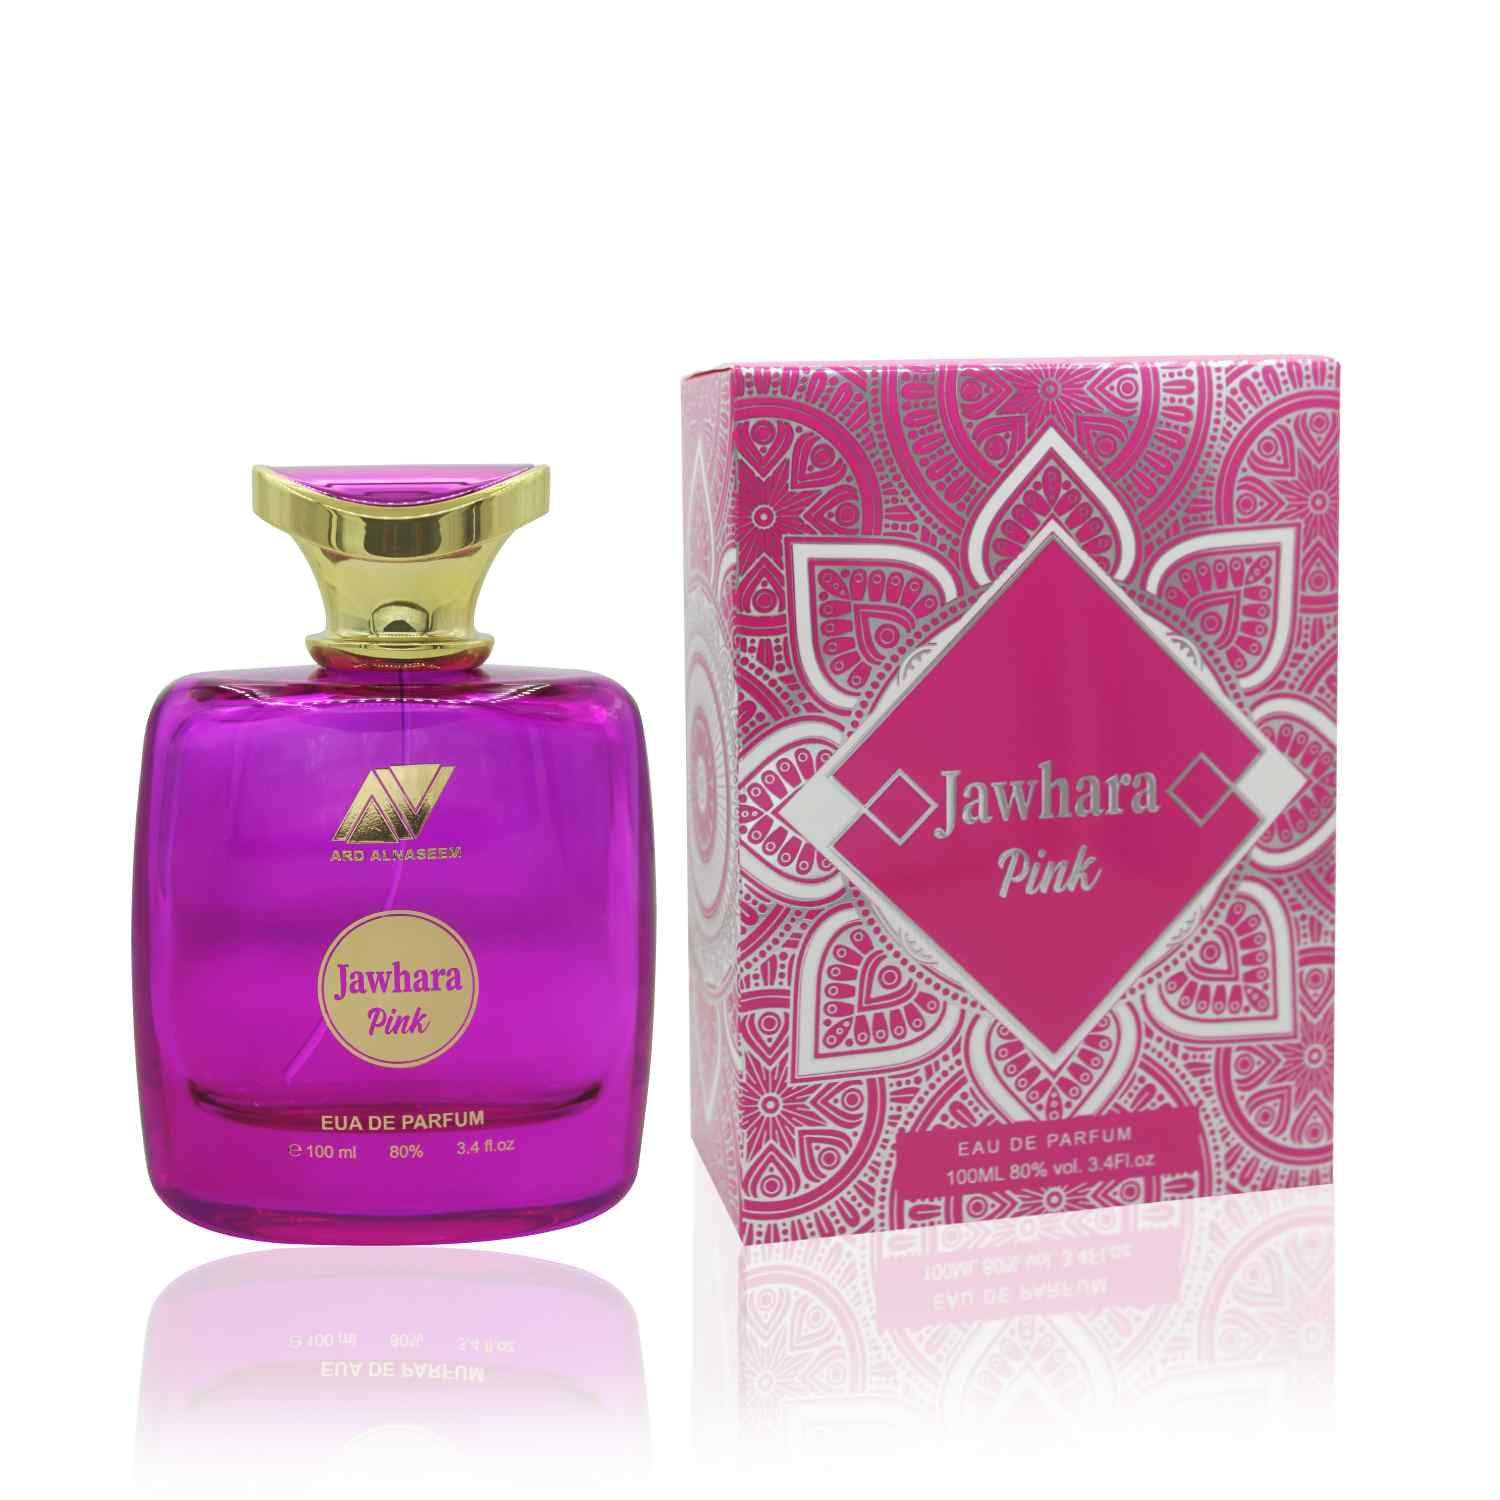 Jawhara Pink Perfume for women by ARD PERFUMES